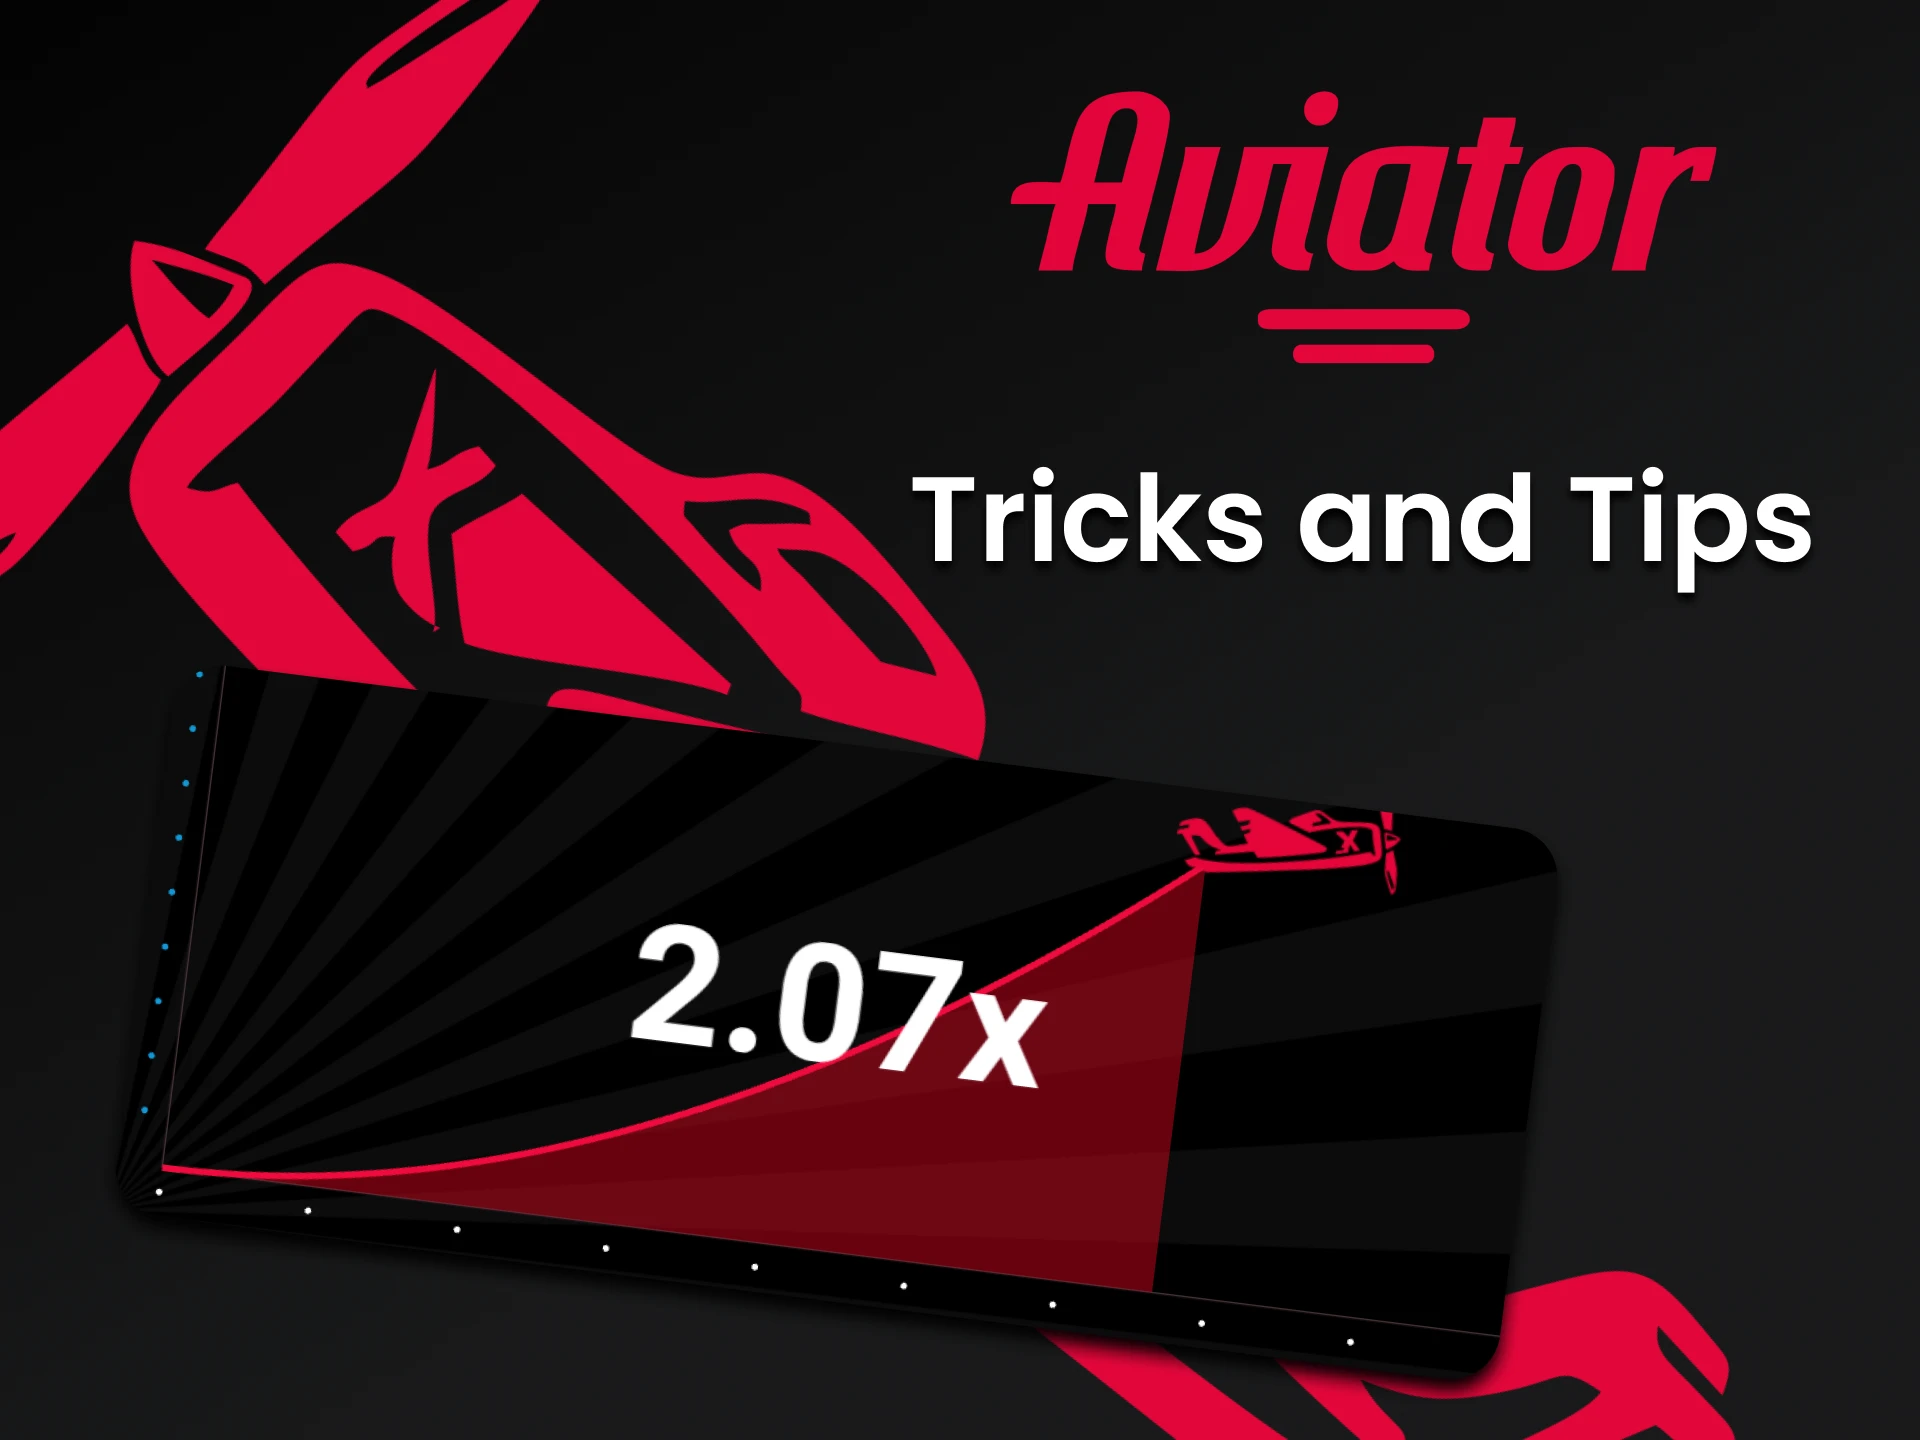 Use all your skills to win in Aviator.